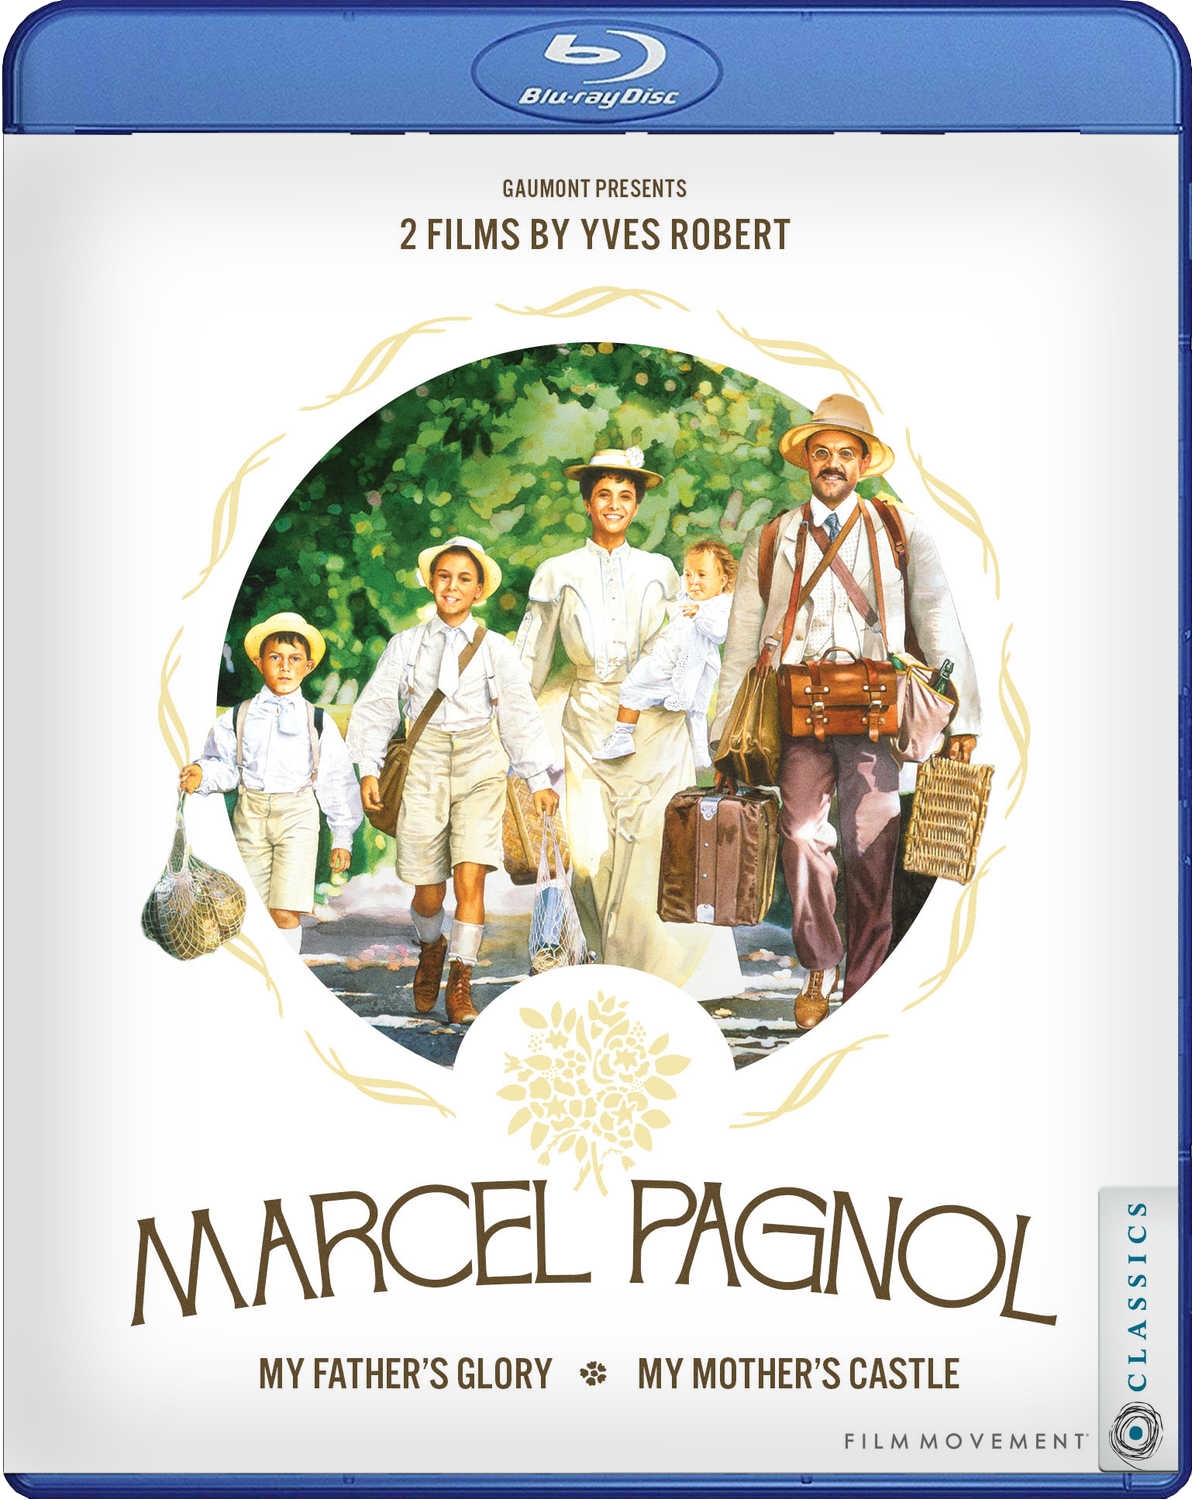 The new Marcel Pagnol blu-ray set includes gorgeous 4k restorations of both My Father's Glory and My Mother's Castle. 